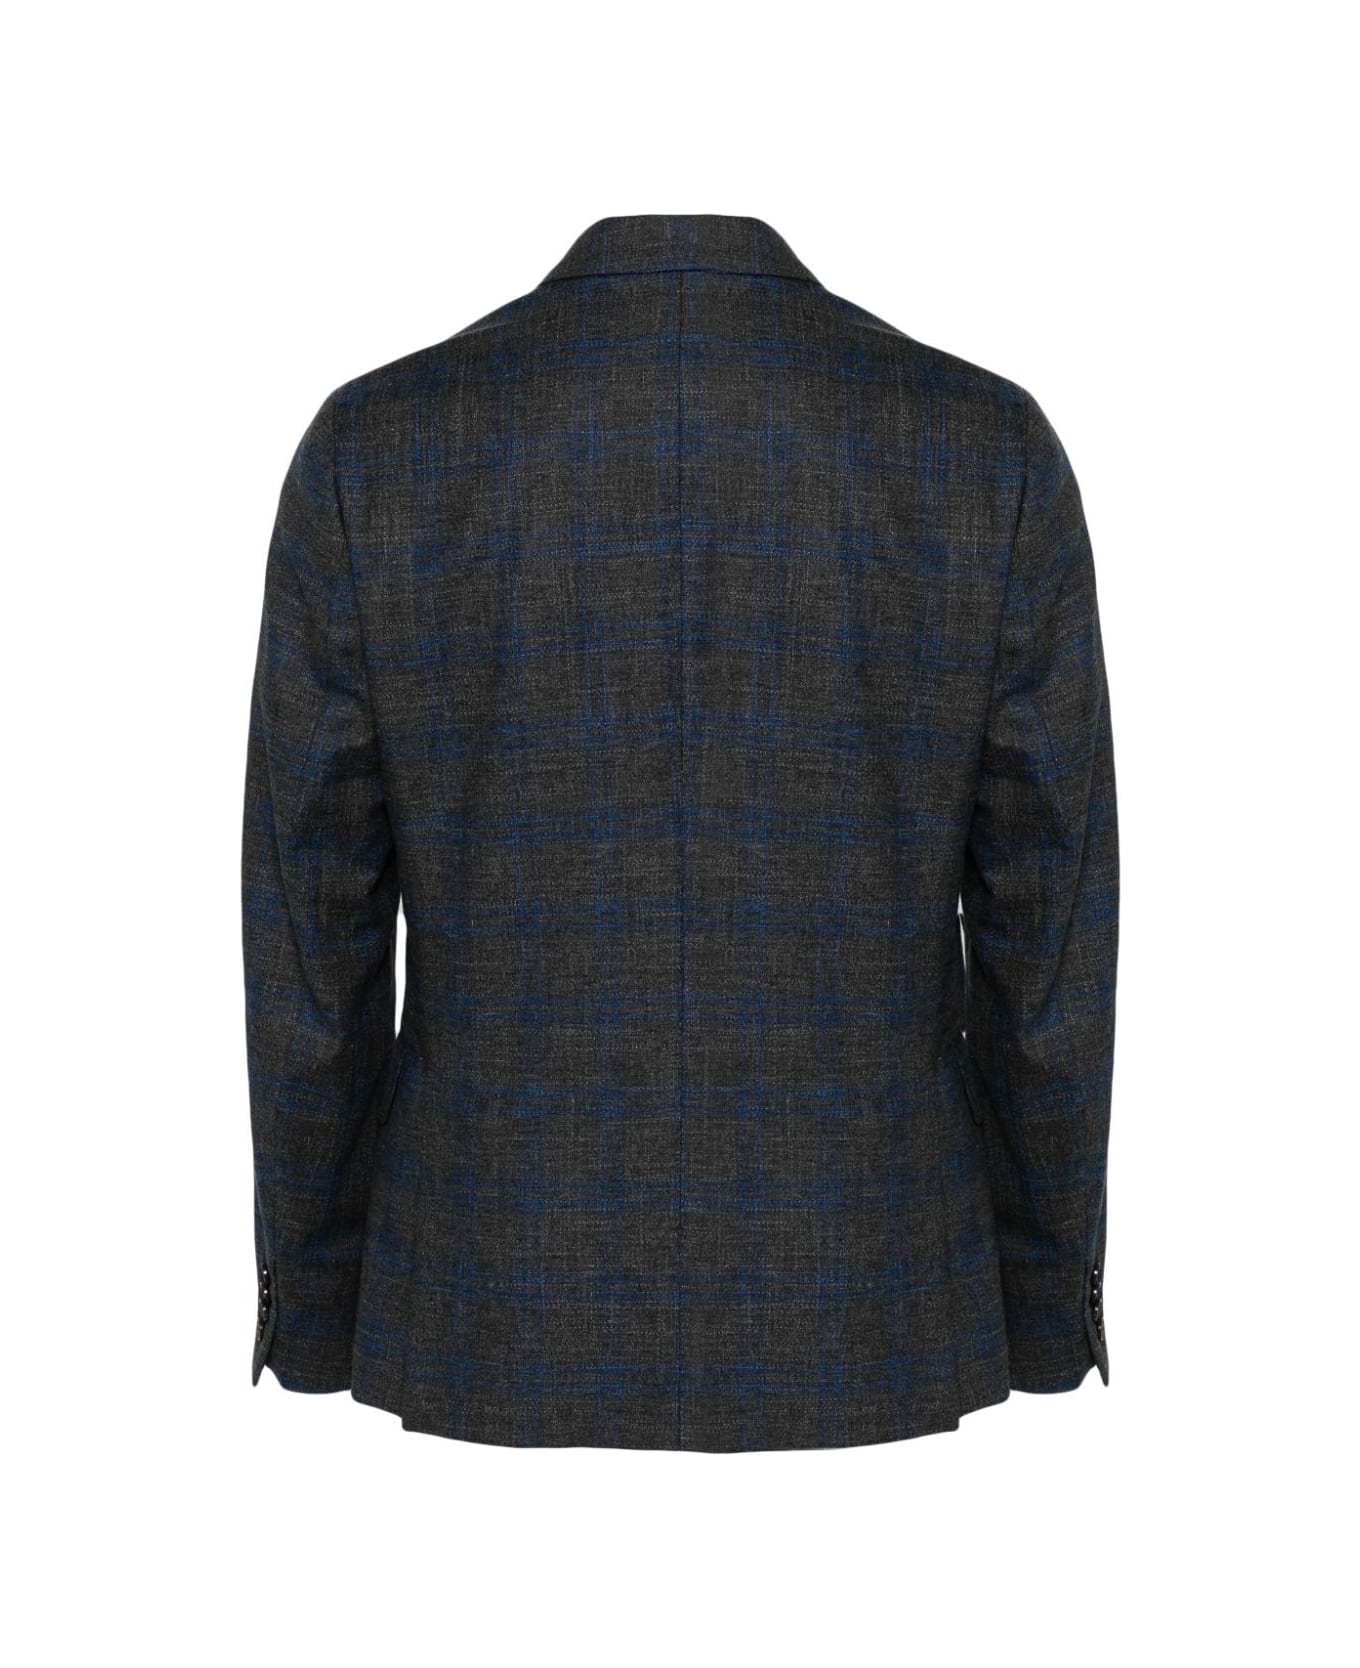 Paul Smith Mens Two Buttons Jacket - Anthracite